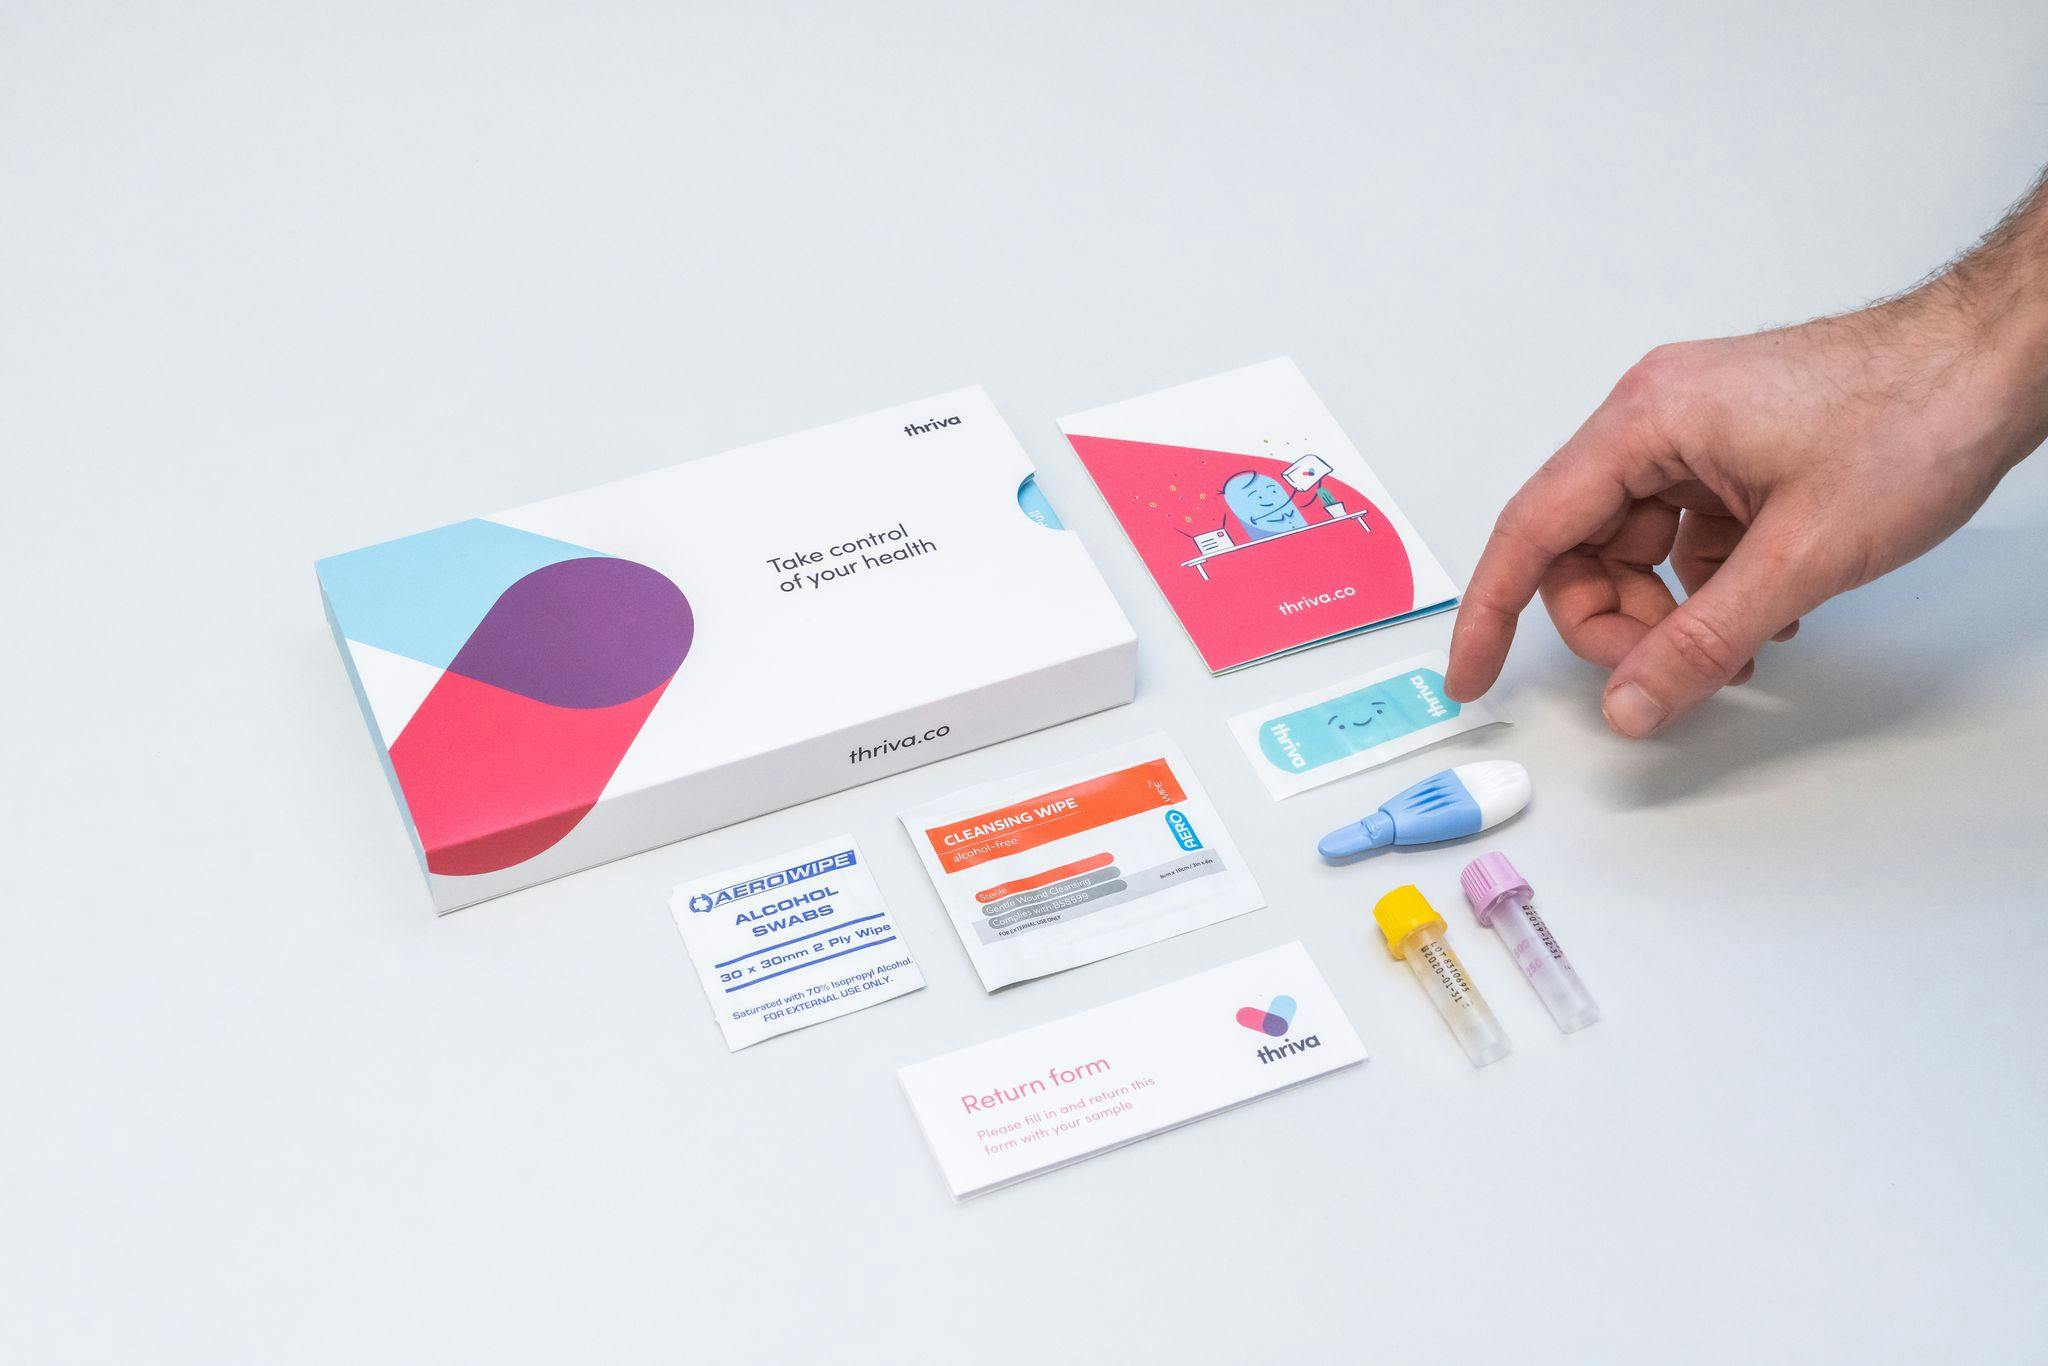 Thriva blood testing kit laid out on table